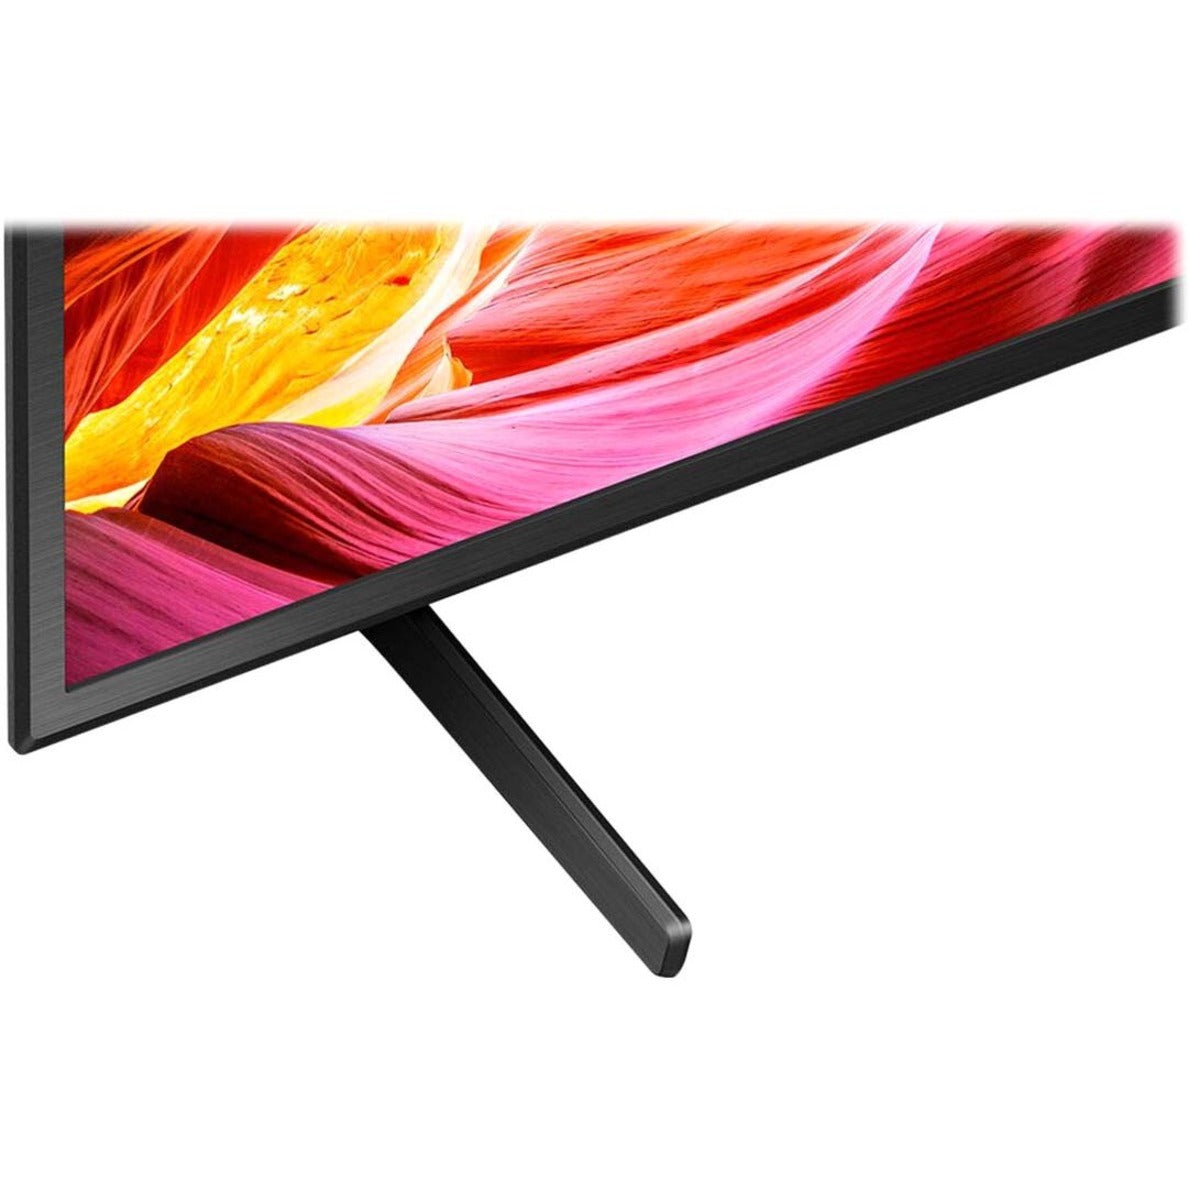 Sony FWD55X75K BRAVIA X75K Digital Signage Display, 55" 4K HDR LED LCD, Android 11, 3 Year Warranty